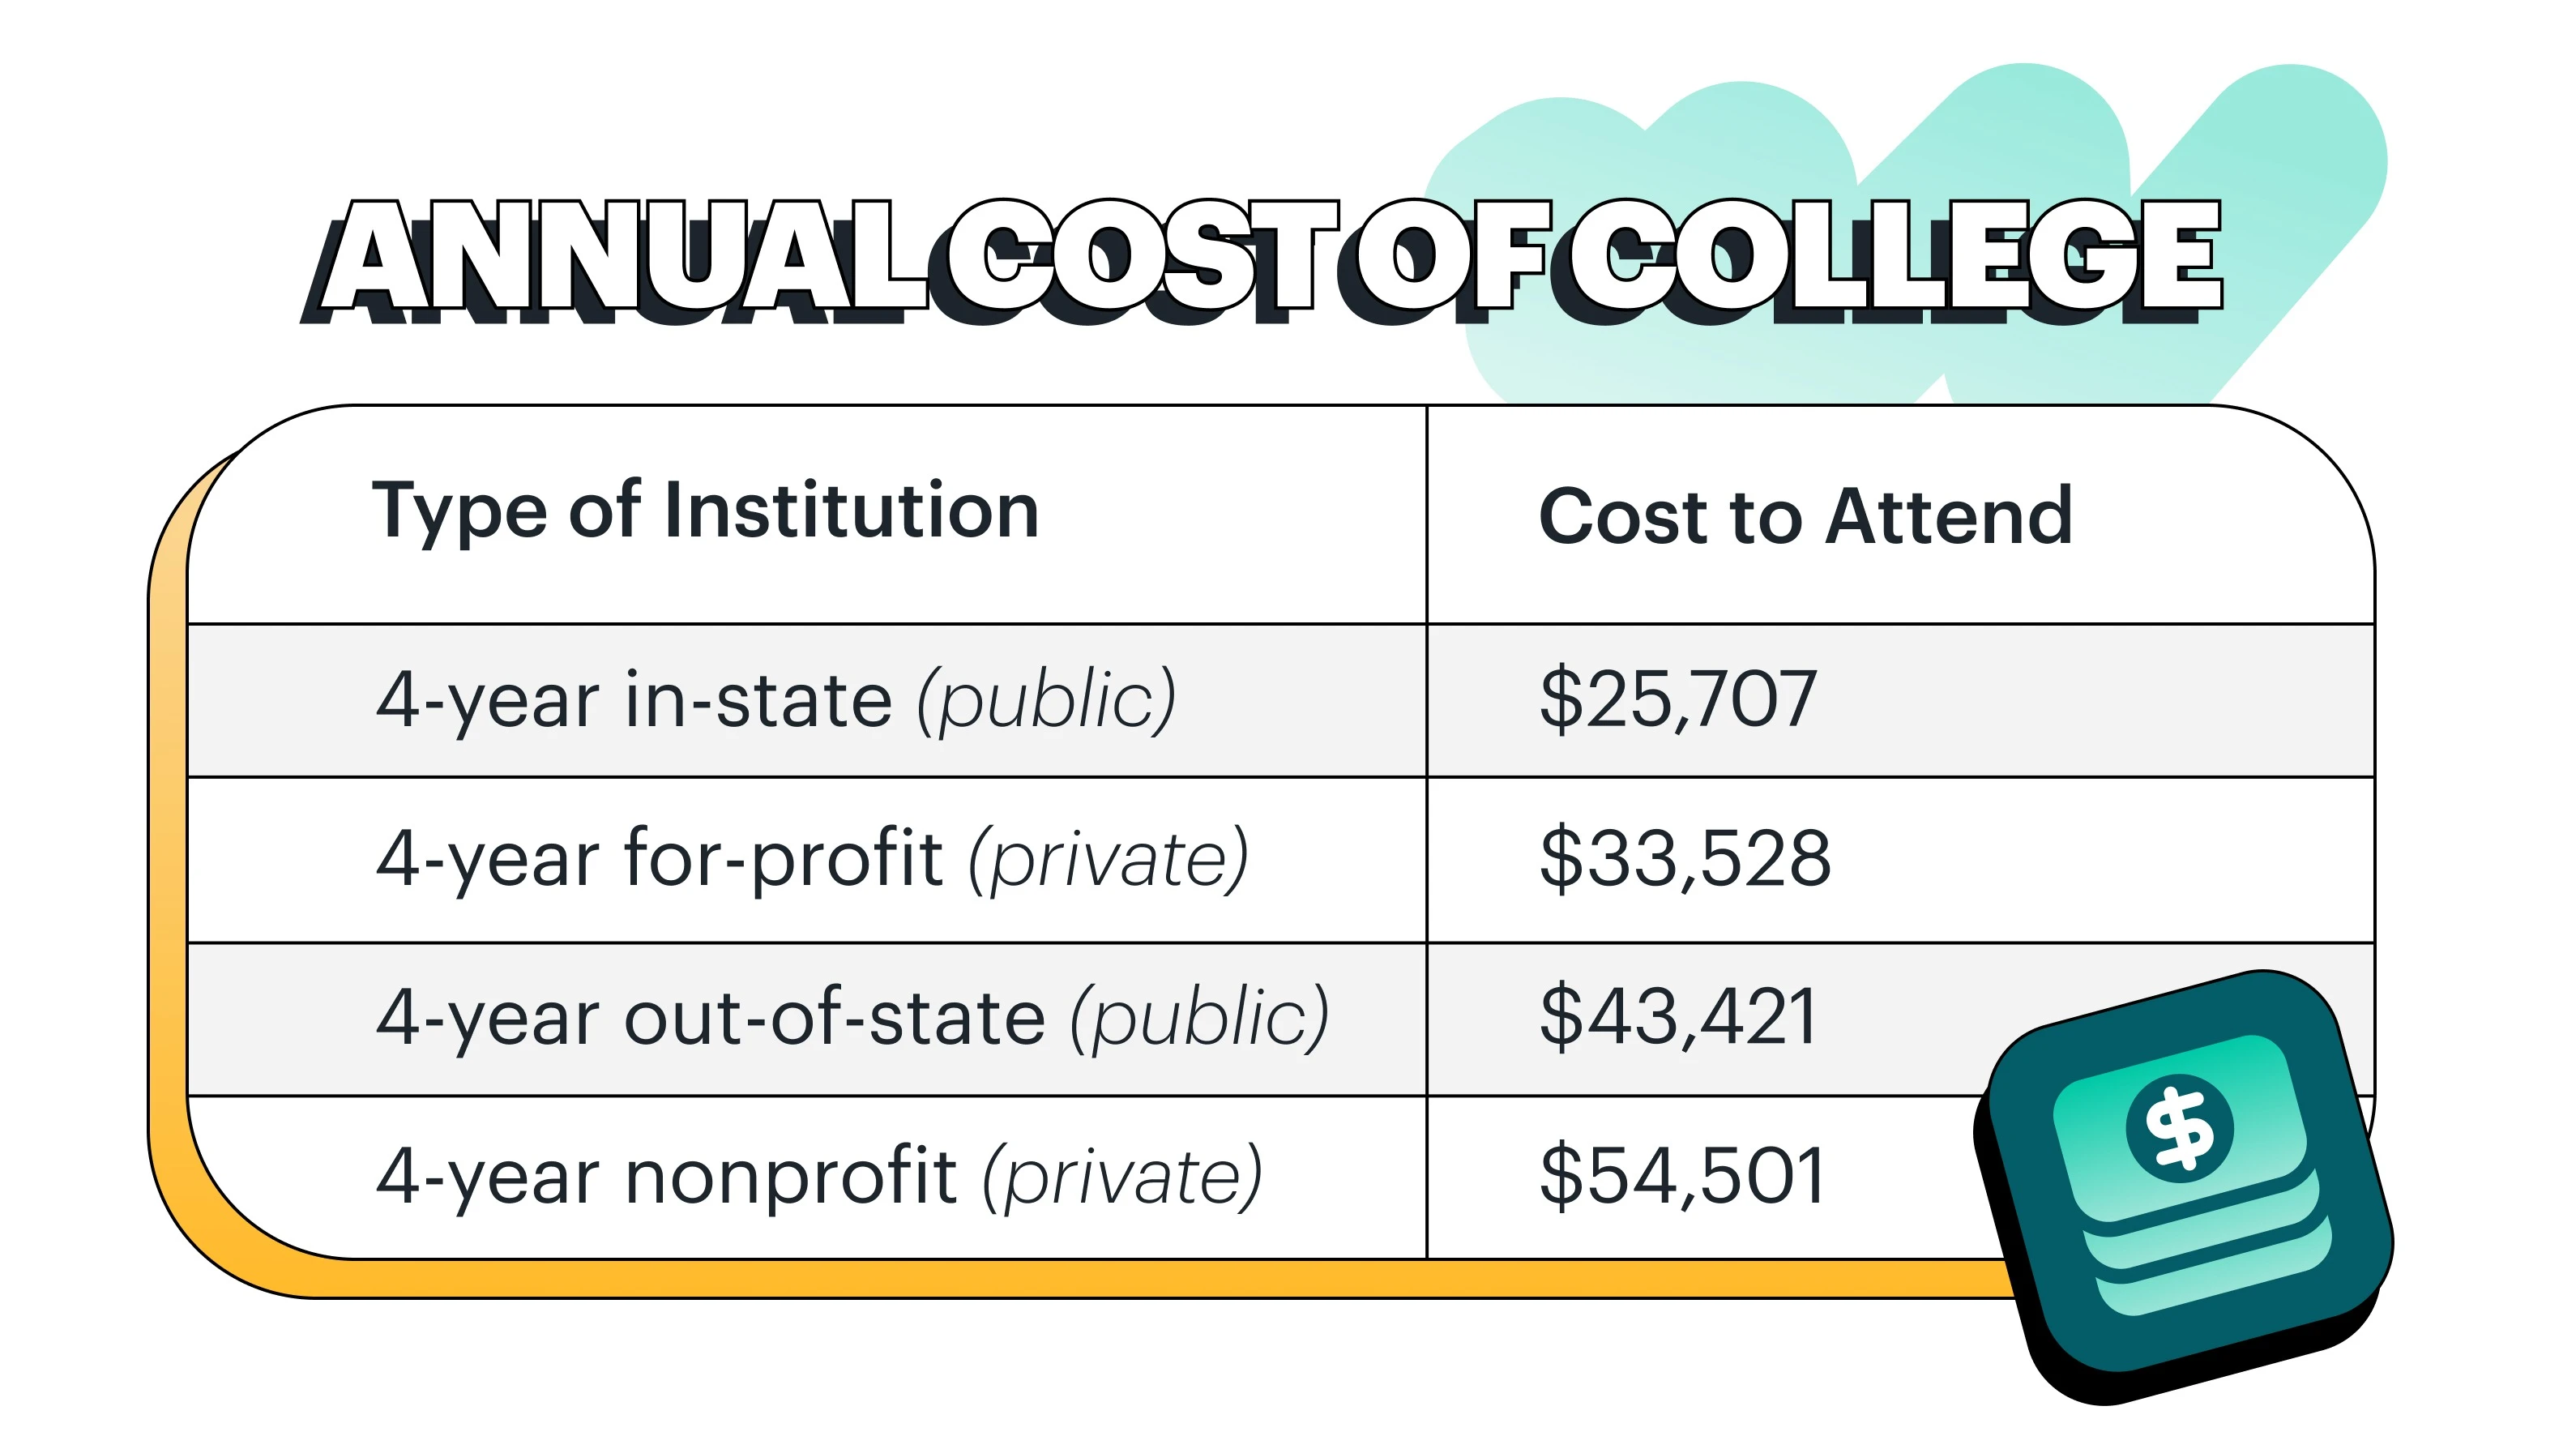 Chart of annual cost of college for public and private 4-year in-state and out-of-state universities